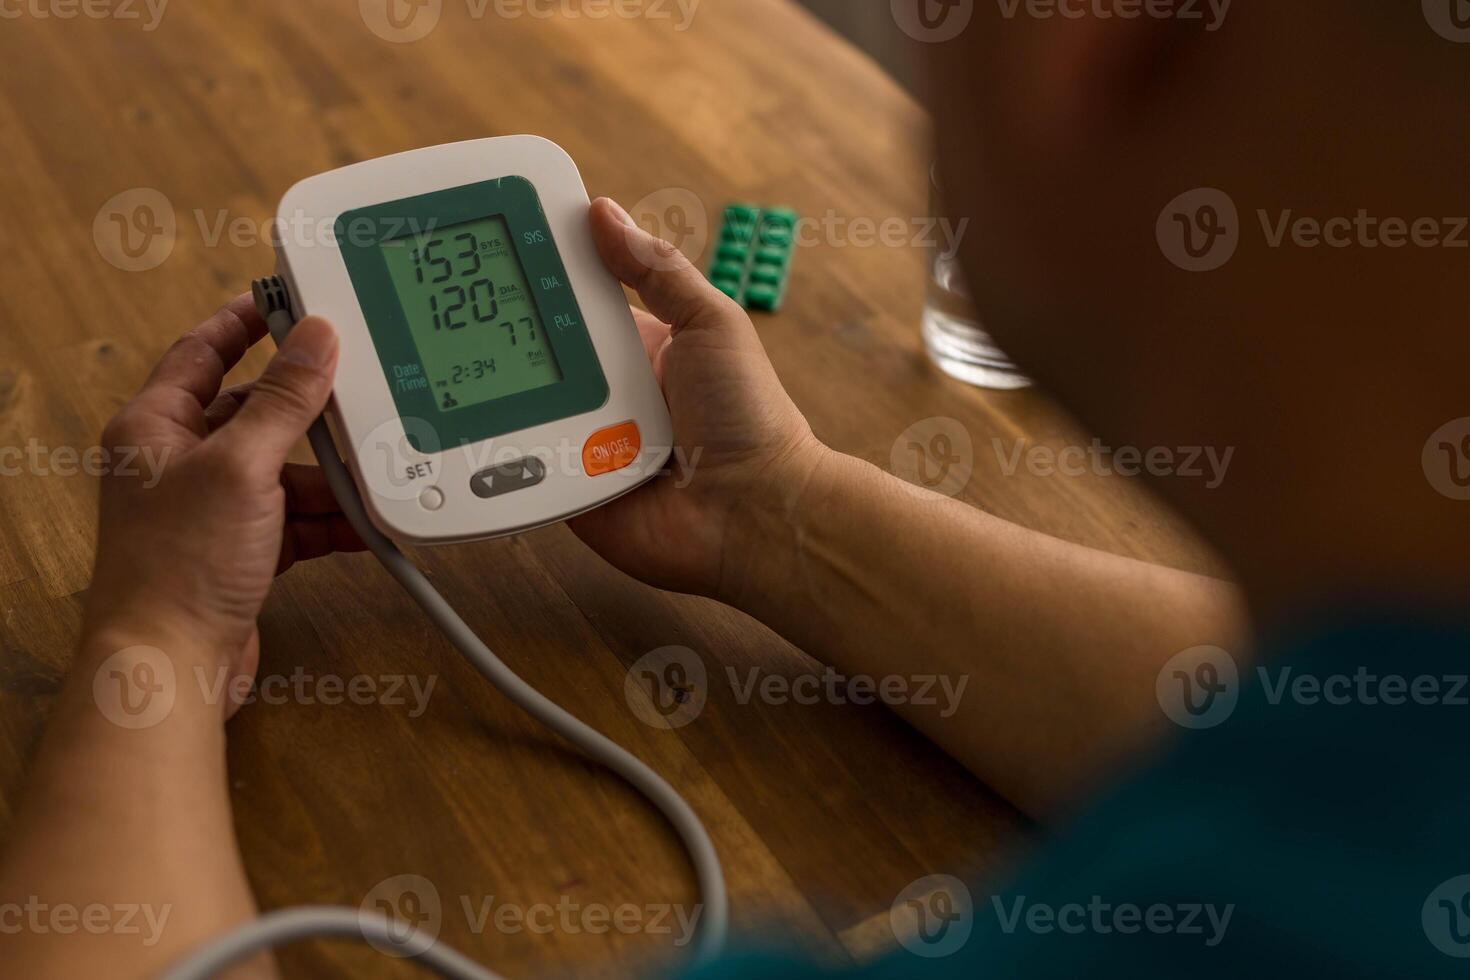 Seniory man checks blood pressure with monitor on upper arm in room photo